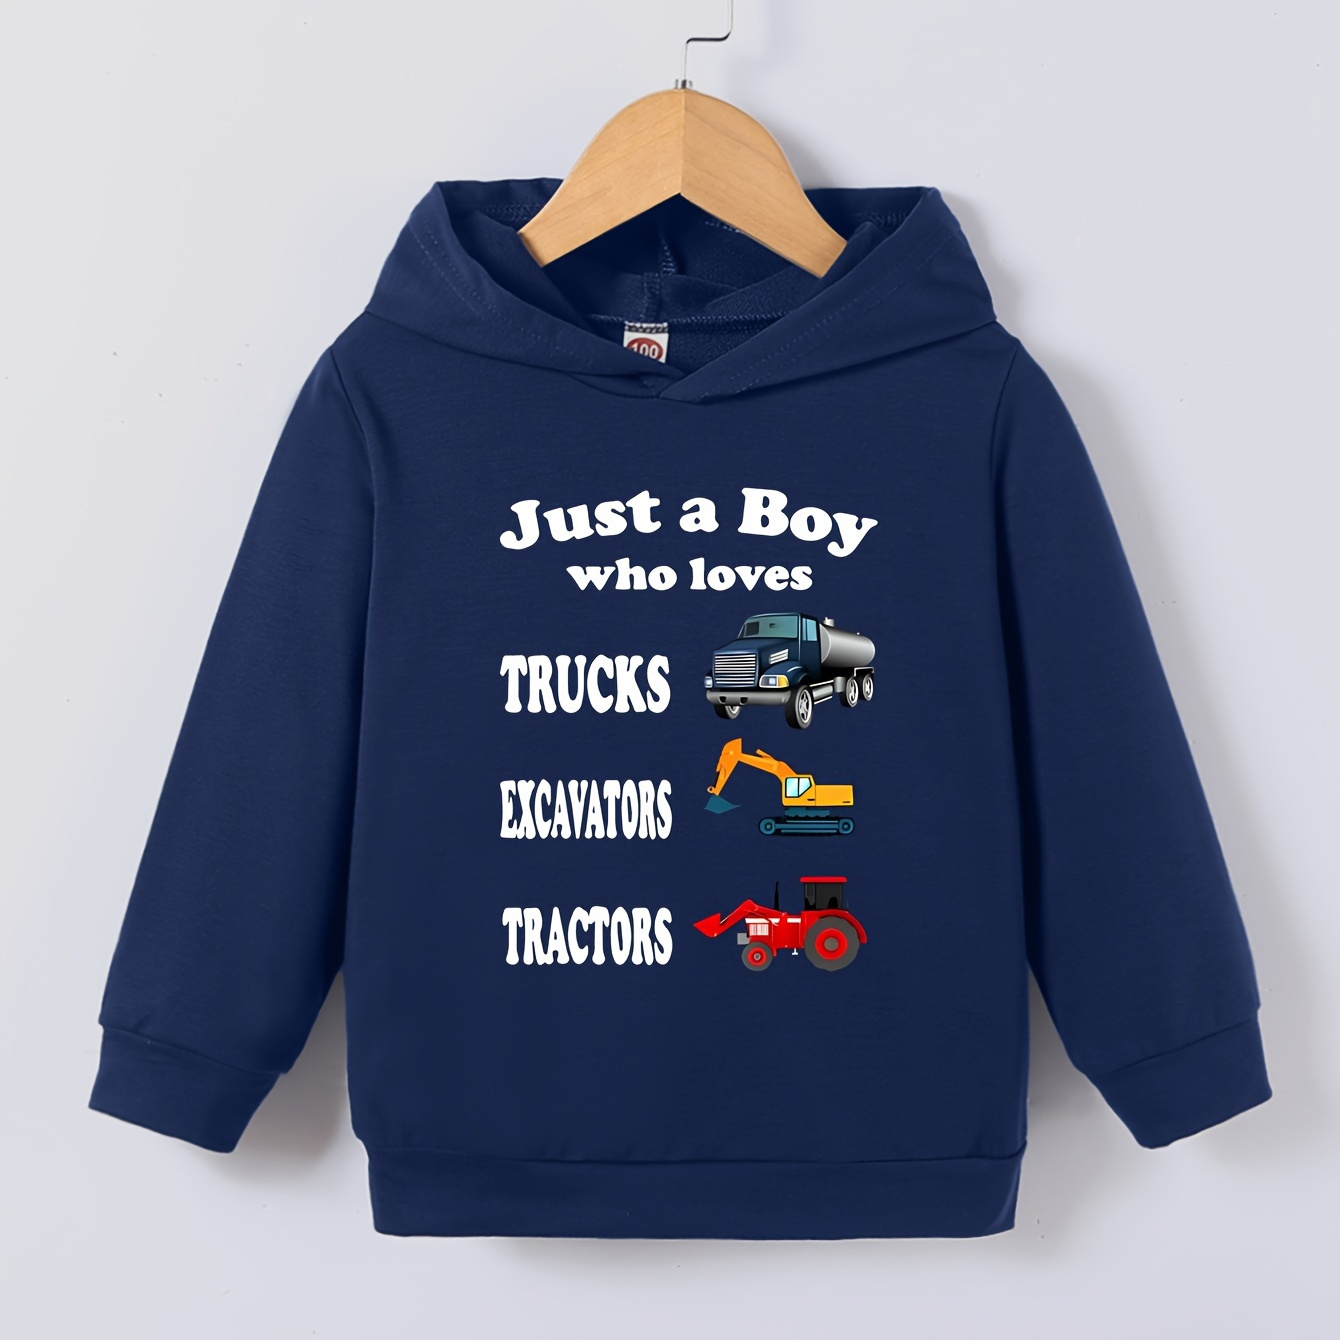 

Just A Boy Who Loves Trucks Excavators And Tractors Letter Print Boys Casual Pullover Hooded Long Sleeve Sweatshirt For Spring Fall, Kids Clothing Outdoor